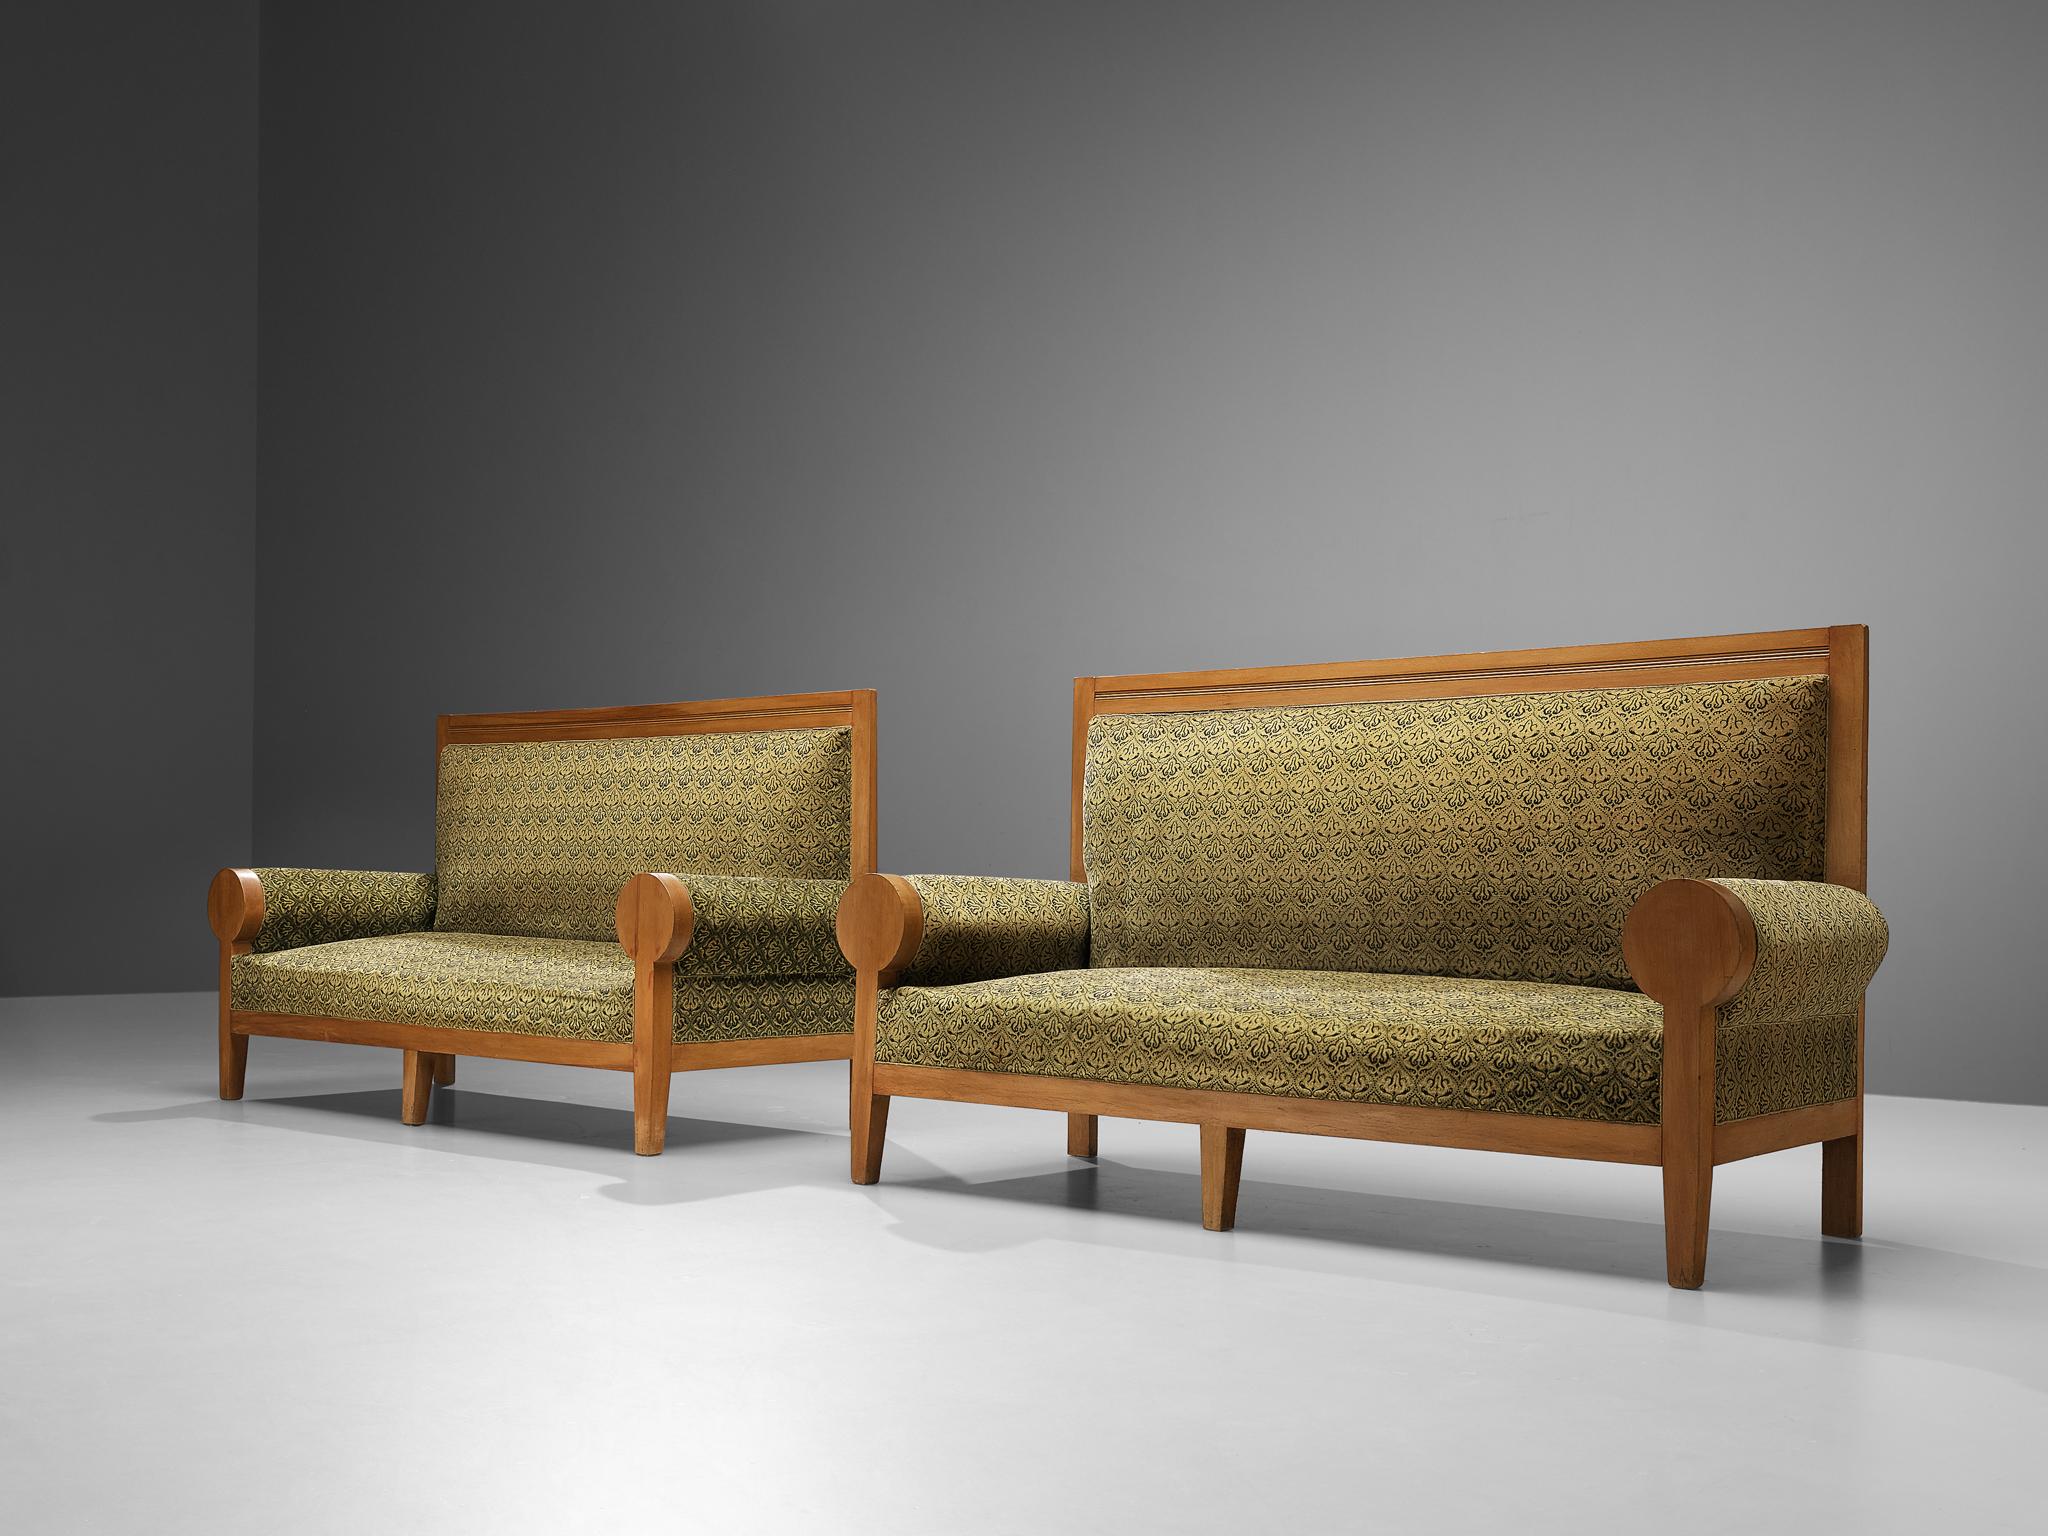 Two sofas, beech, fabric, Europe, 1940s

These sofas has a strong appearance, due the high back and the round armrests that are emphasized by the wooden legs rising upwards. The high backrest is surrounded by beech as well which features carved